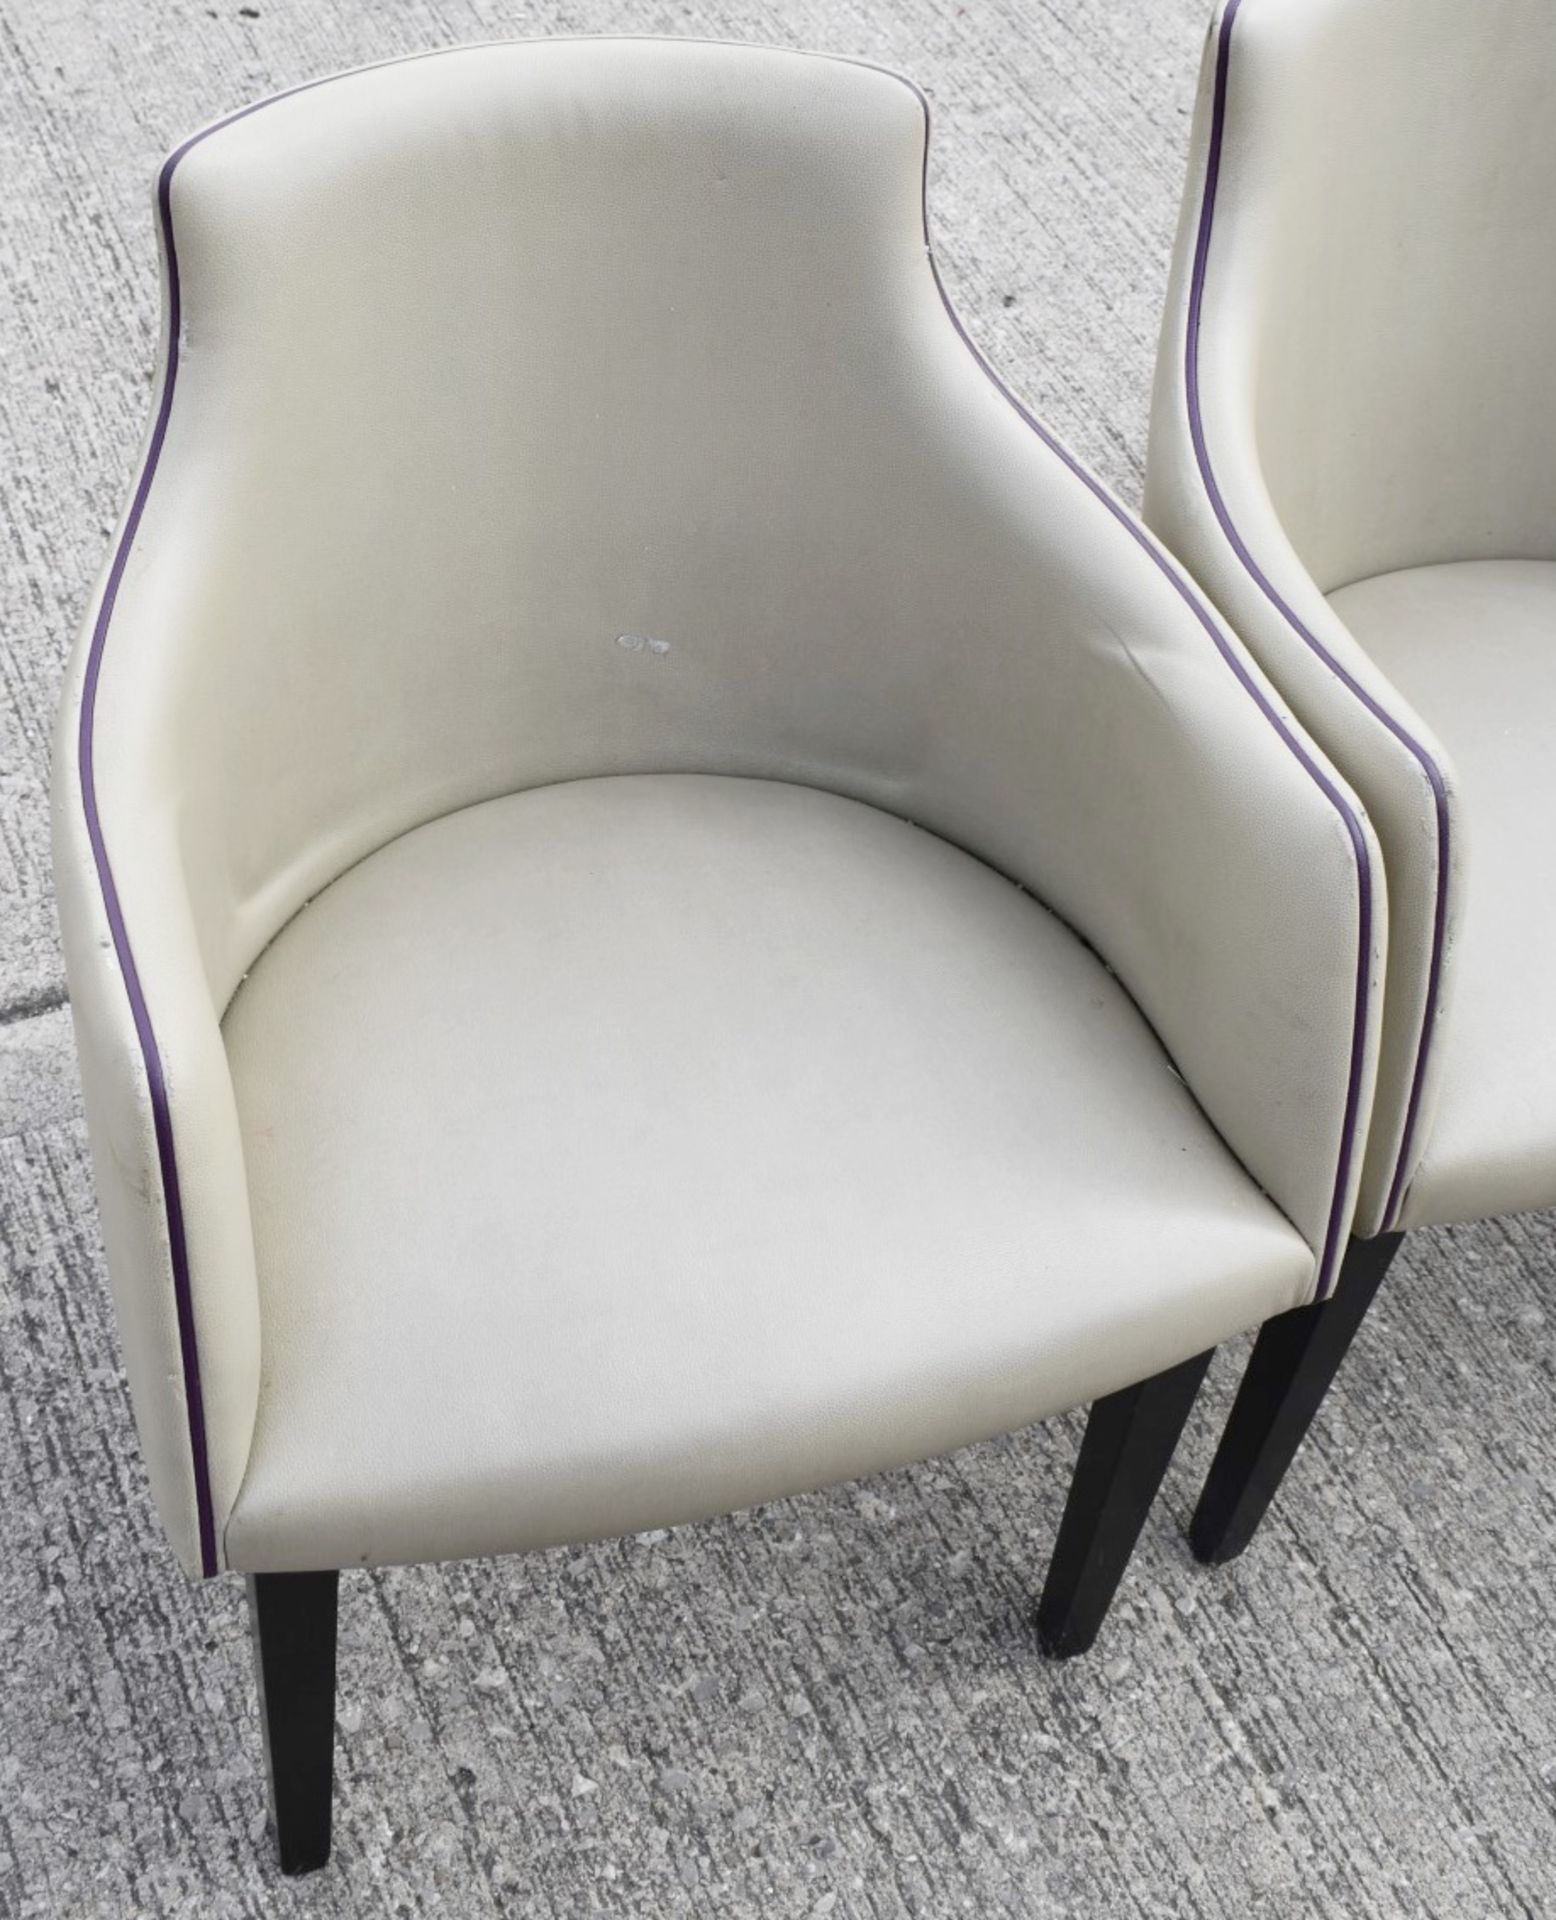 3 x Faux Leather Upholstered Chairs In Light Grey with Purple Piping - Ref: HBK579+580+581 / WH2 - - Image 4 of 12